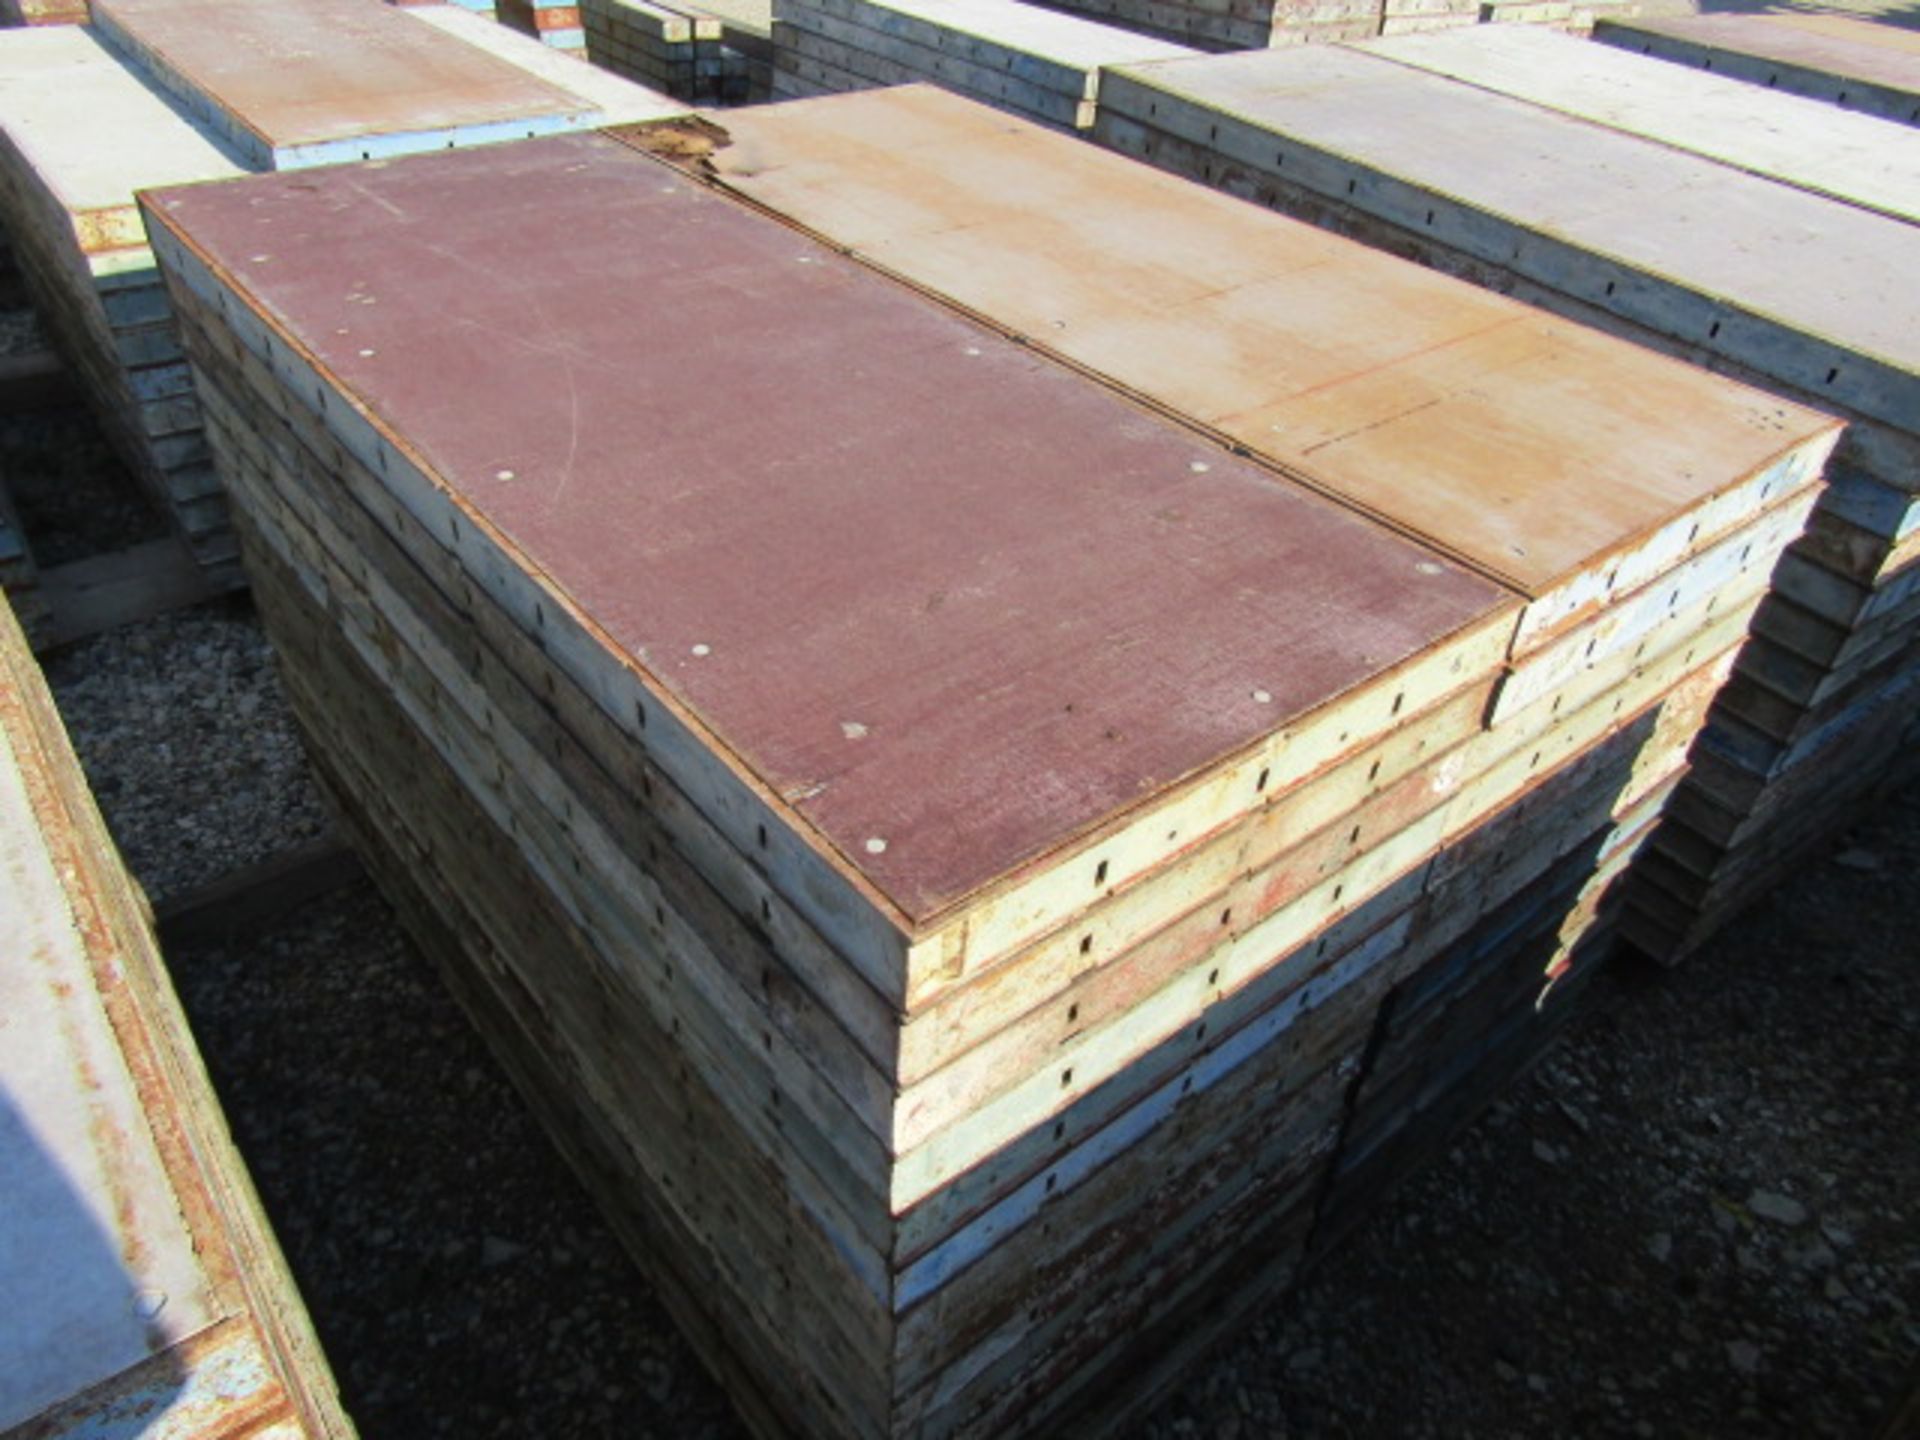 (30) 24" x 5' Symons Steel Ply Forms